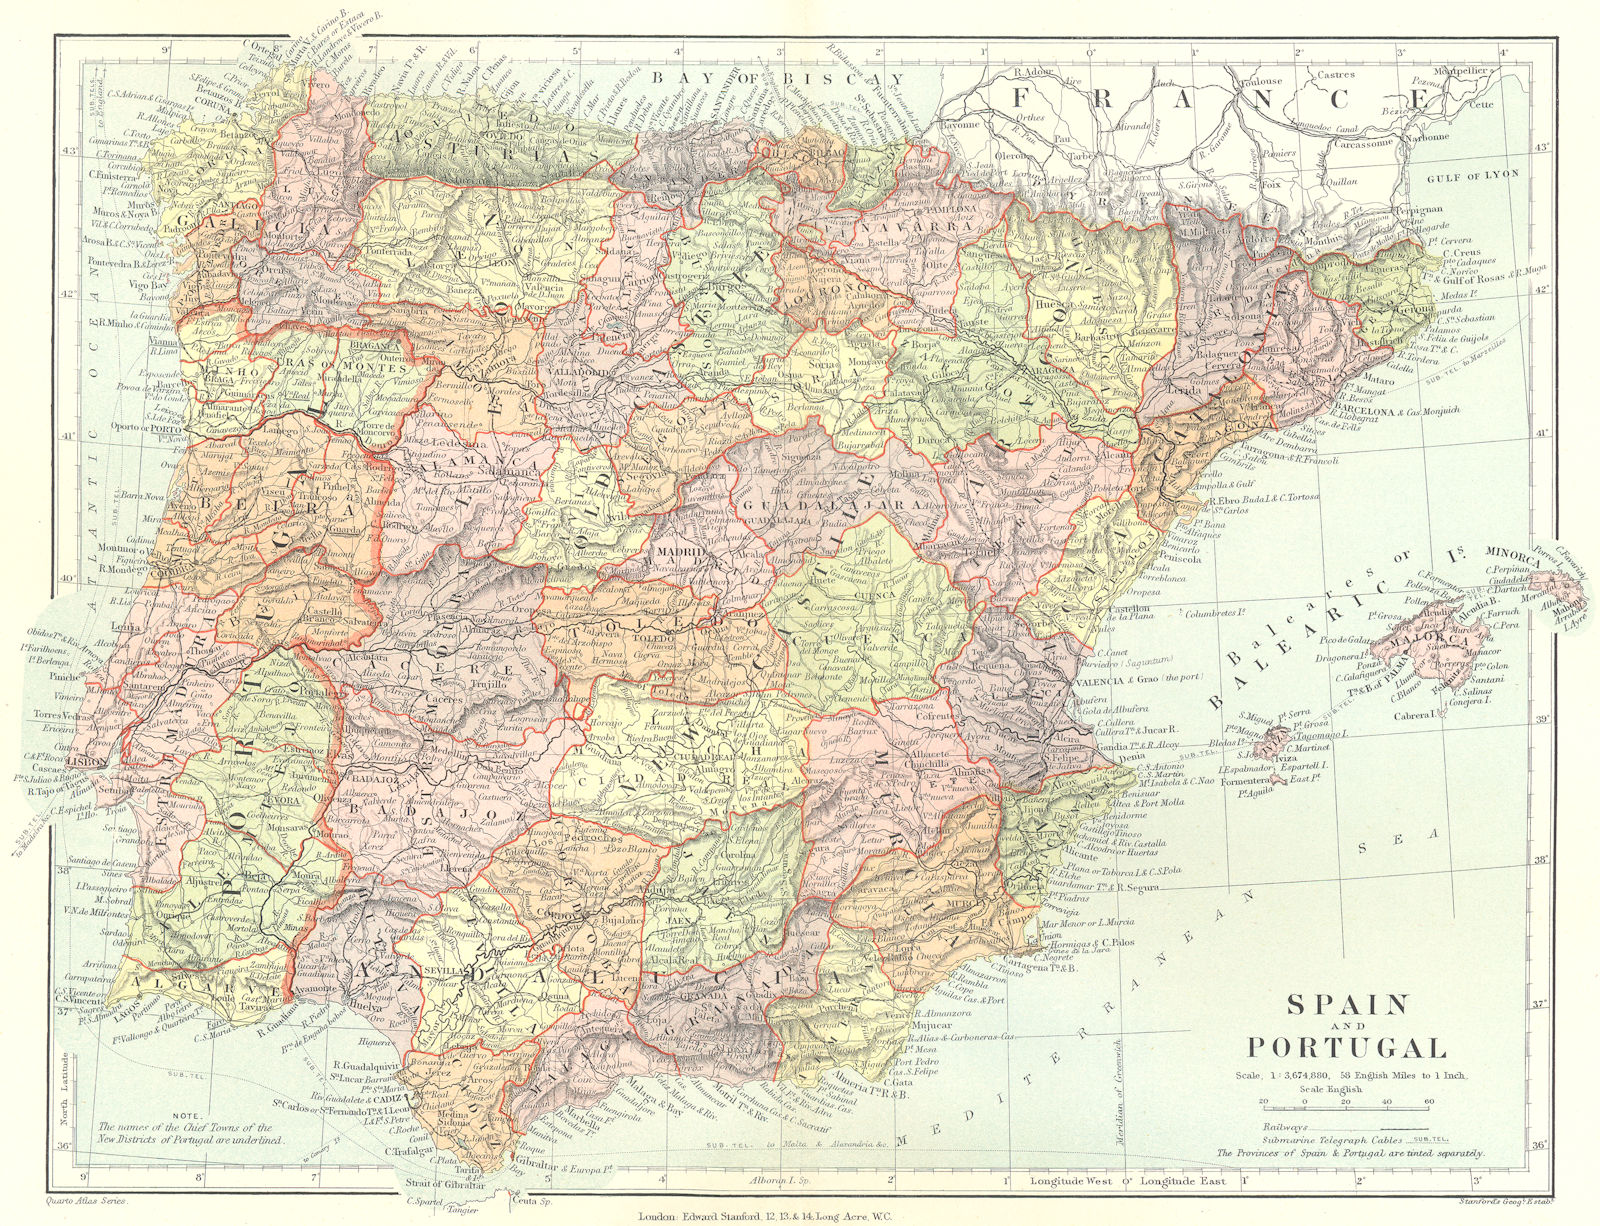 IBERIA. Spain and Portugal showing provinces. STANFORD 1906 old antique map